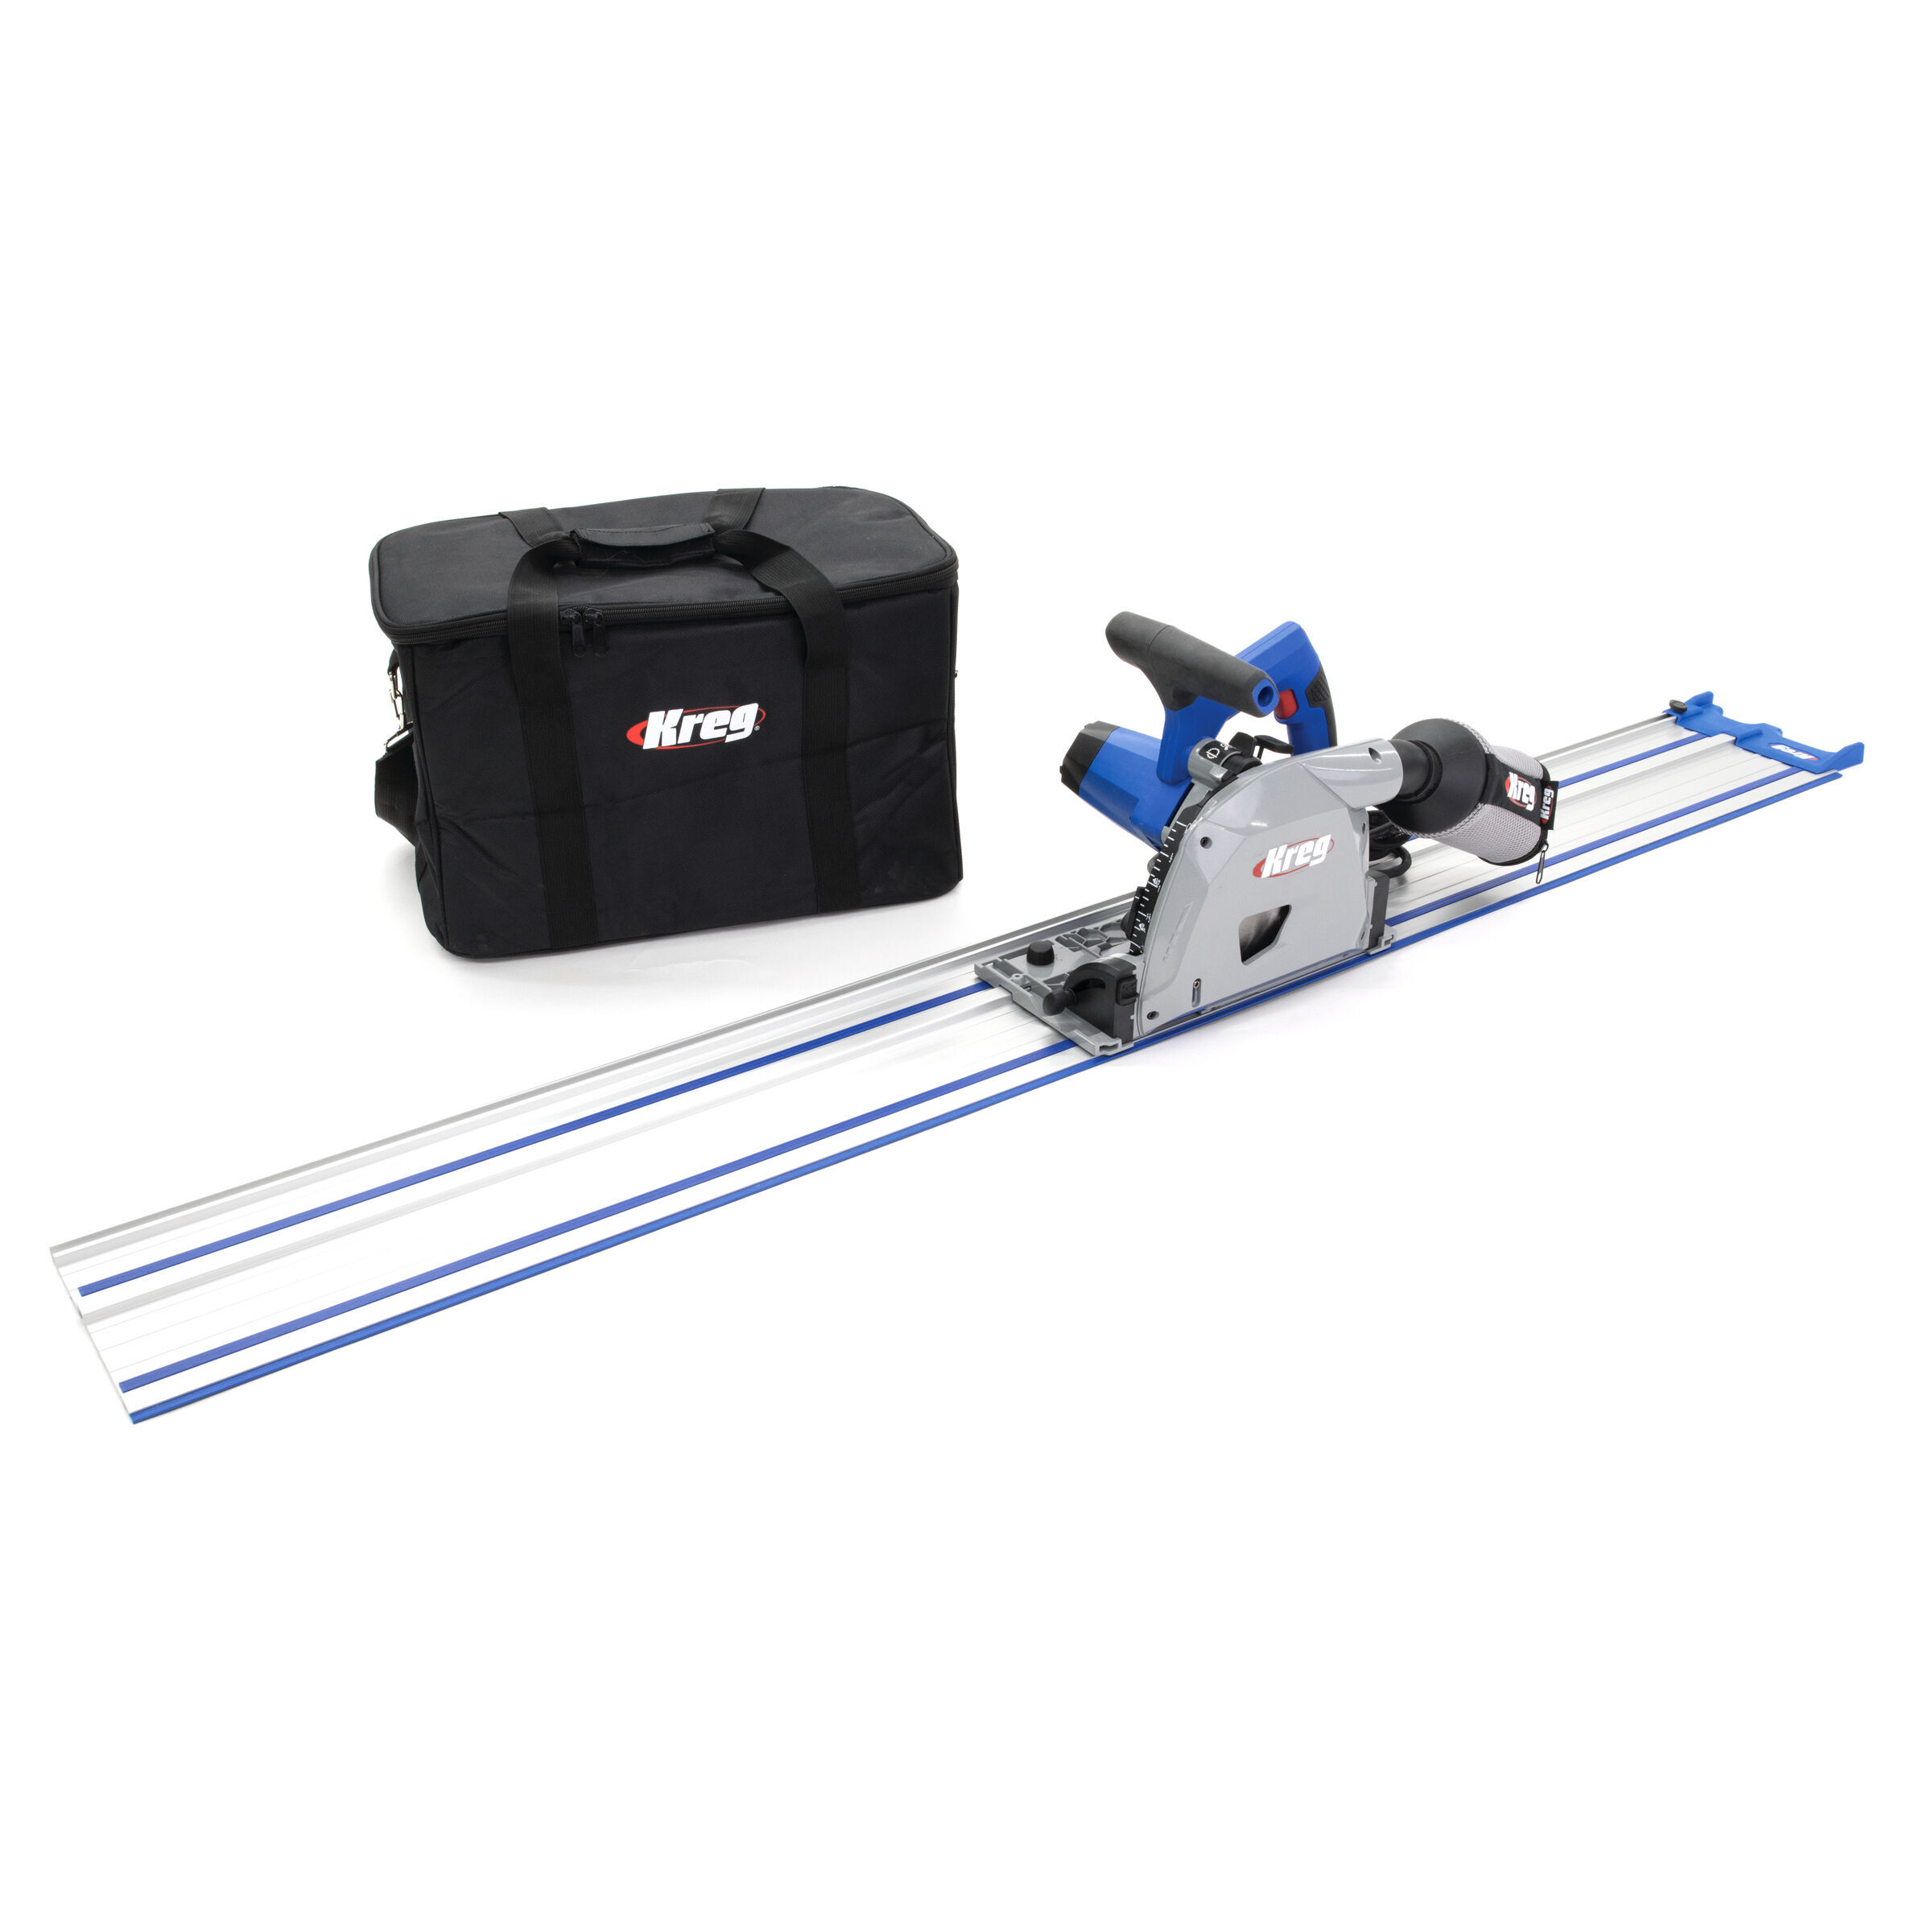 Adaptive Cutting System Saw + Guide Track Kit